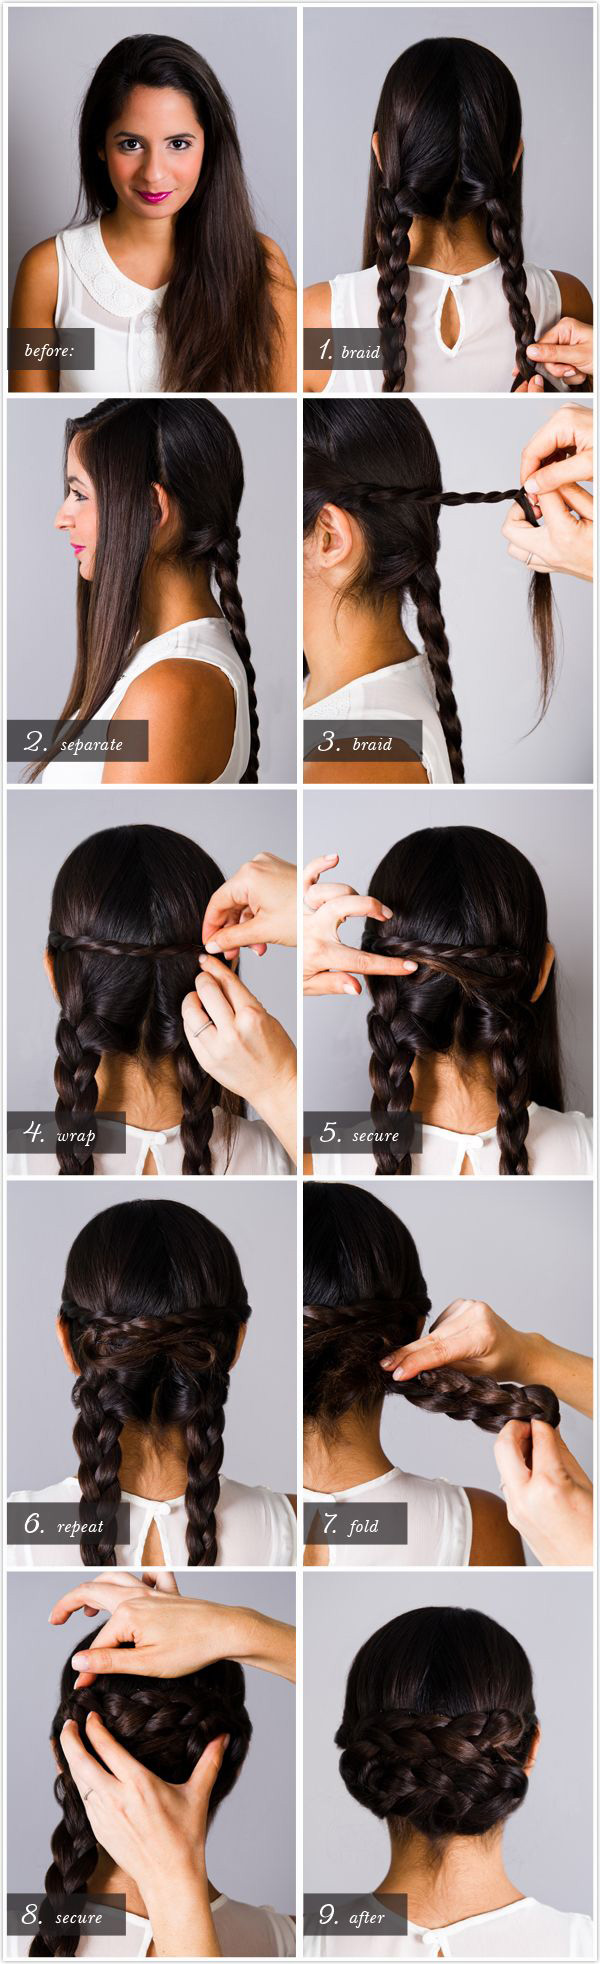 5 Simple Hairstyles for Oily, Greasy Hair | Livon